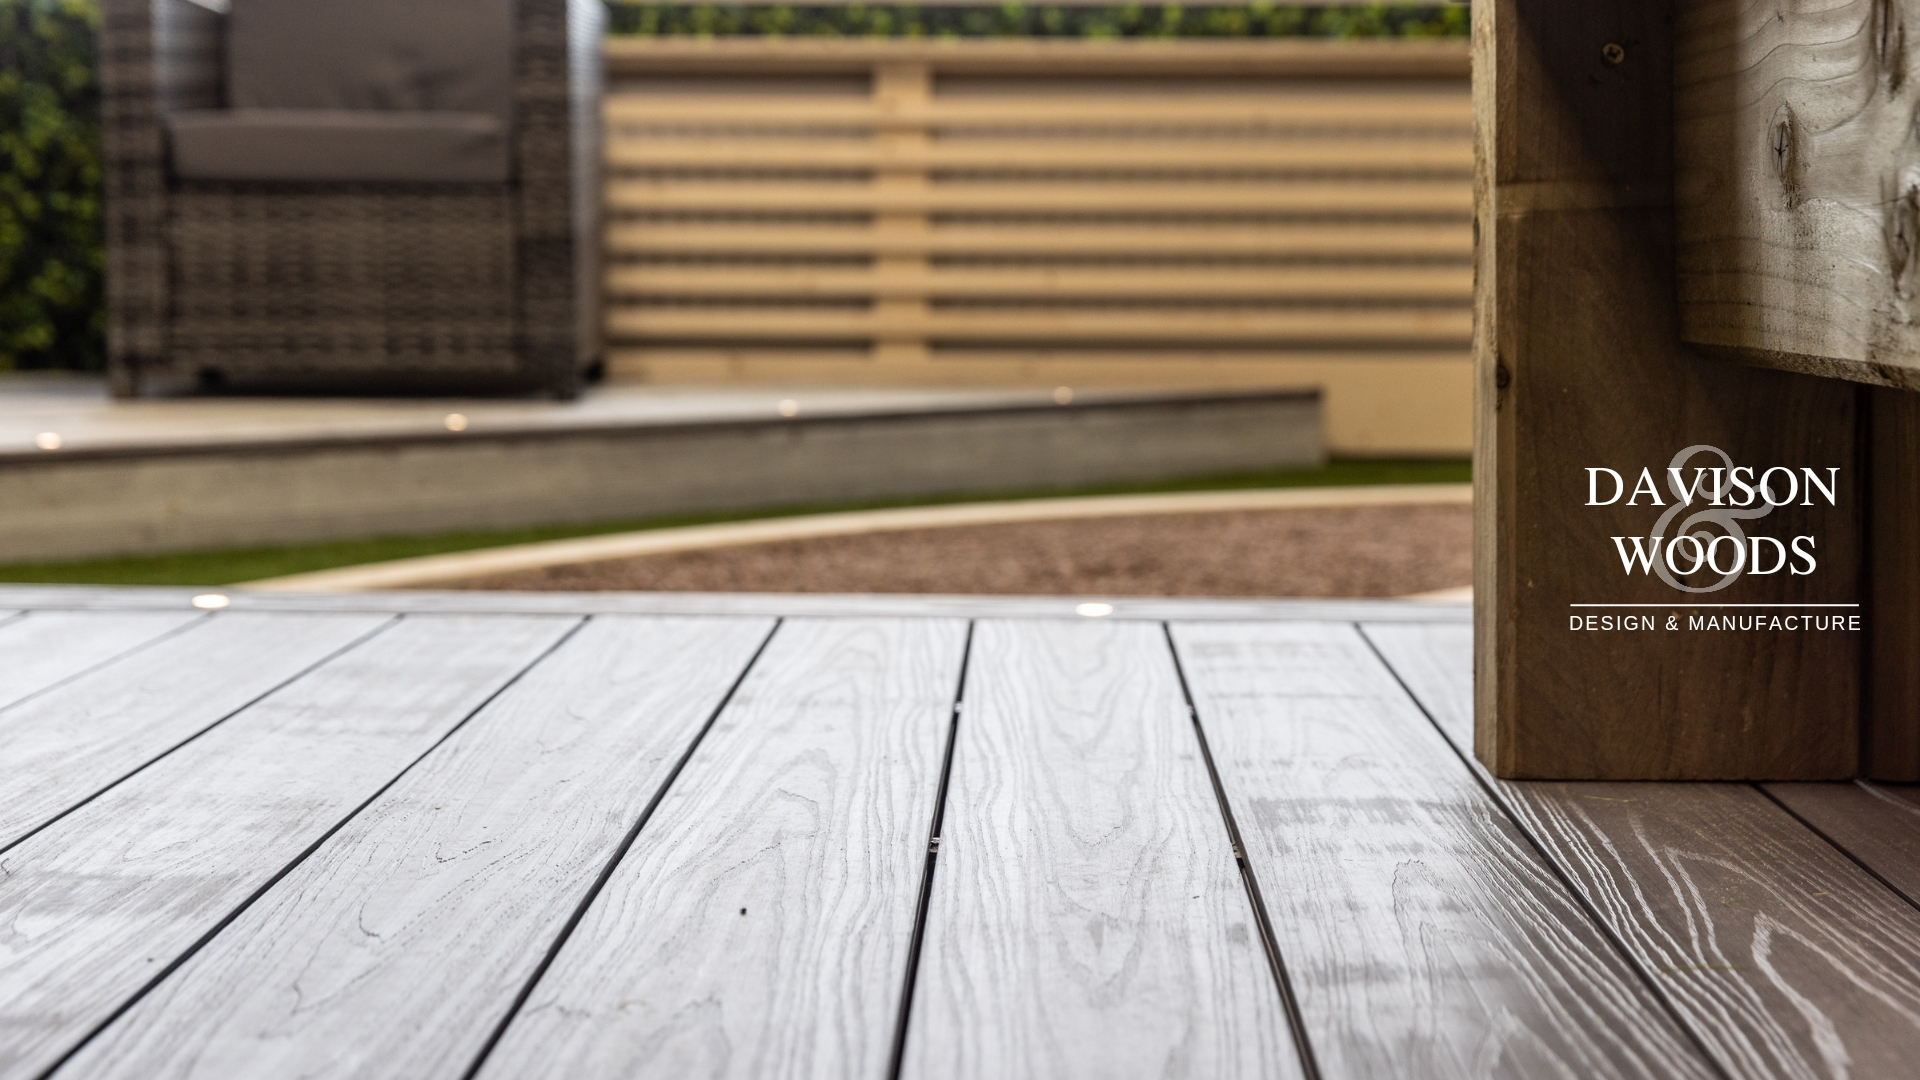 Close up of the grain detail on the BSW timber decking floor showing the unique aesthetic qualities of the timber.